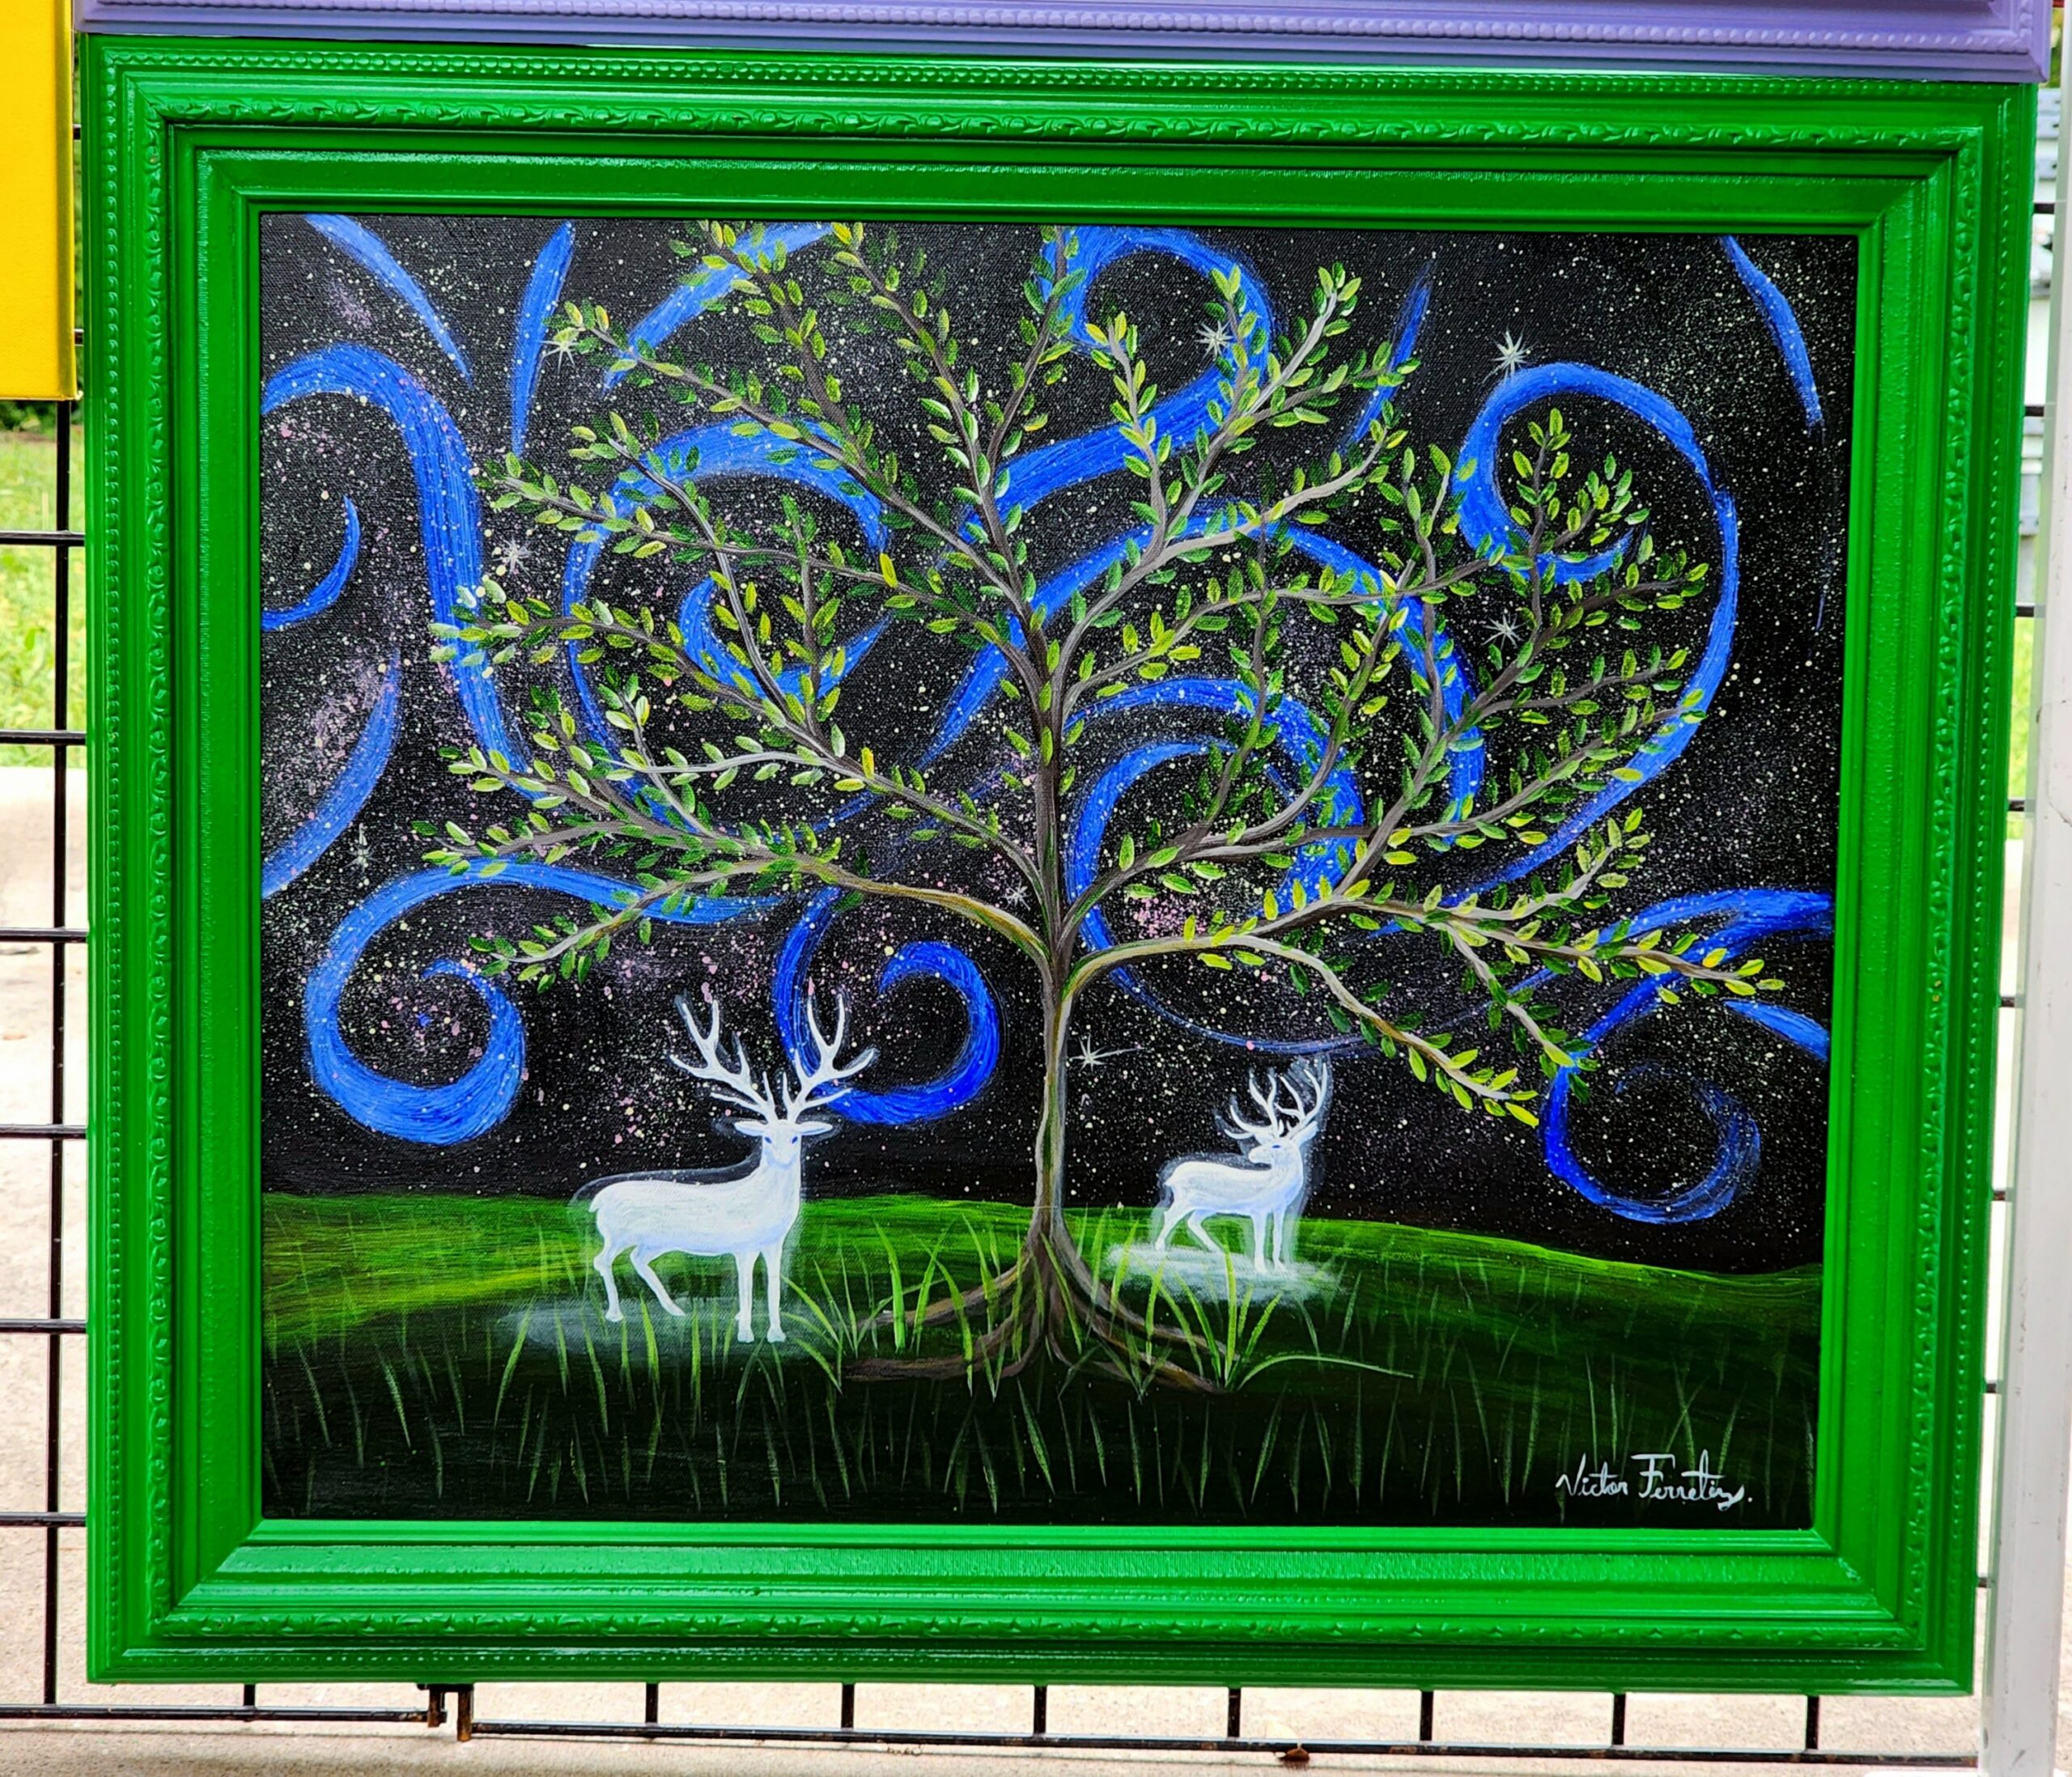 Surrealistic/magical depiction of glowing deers under a magical sky with a tree. Painted wooden frame. Painting size: 20″x24″